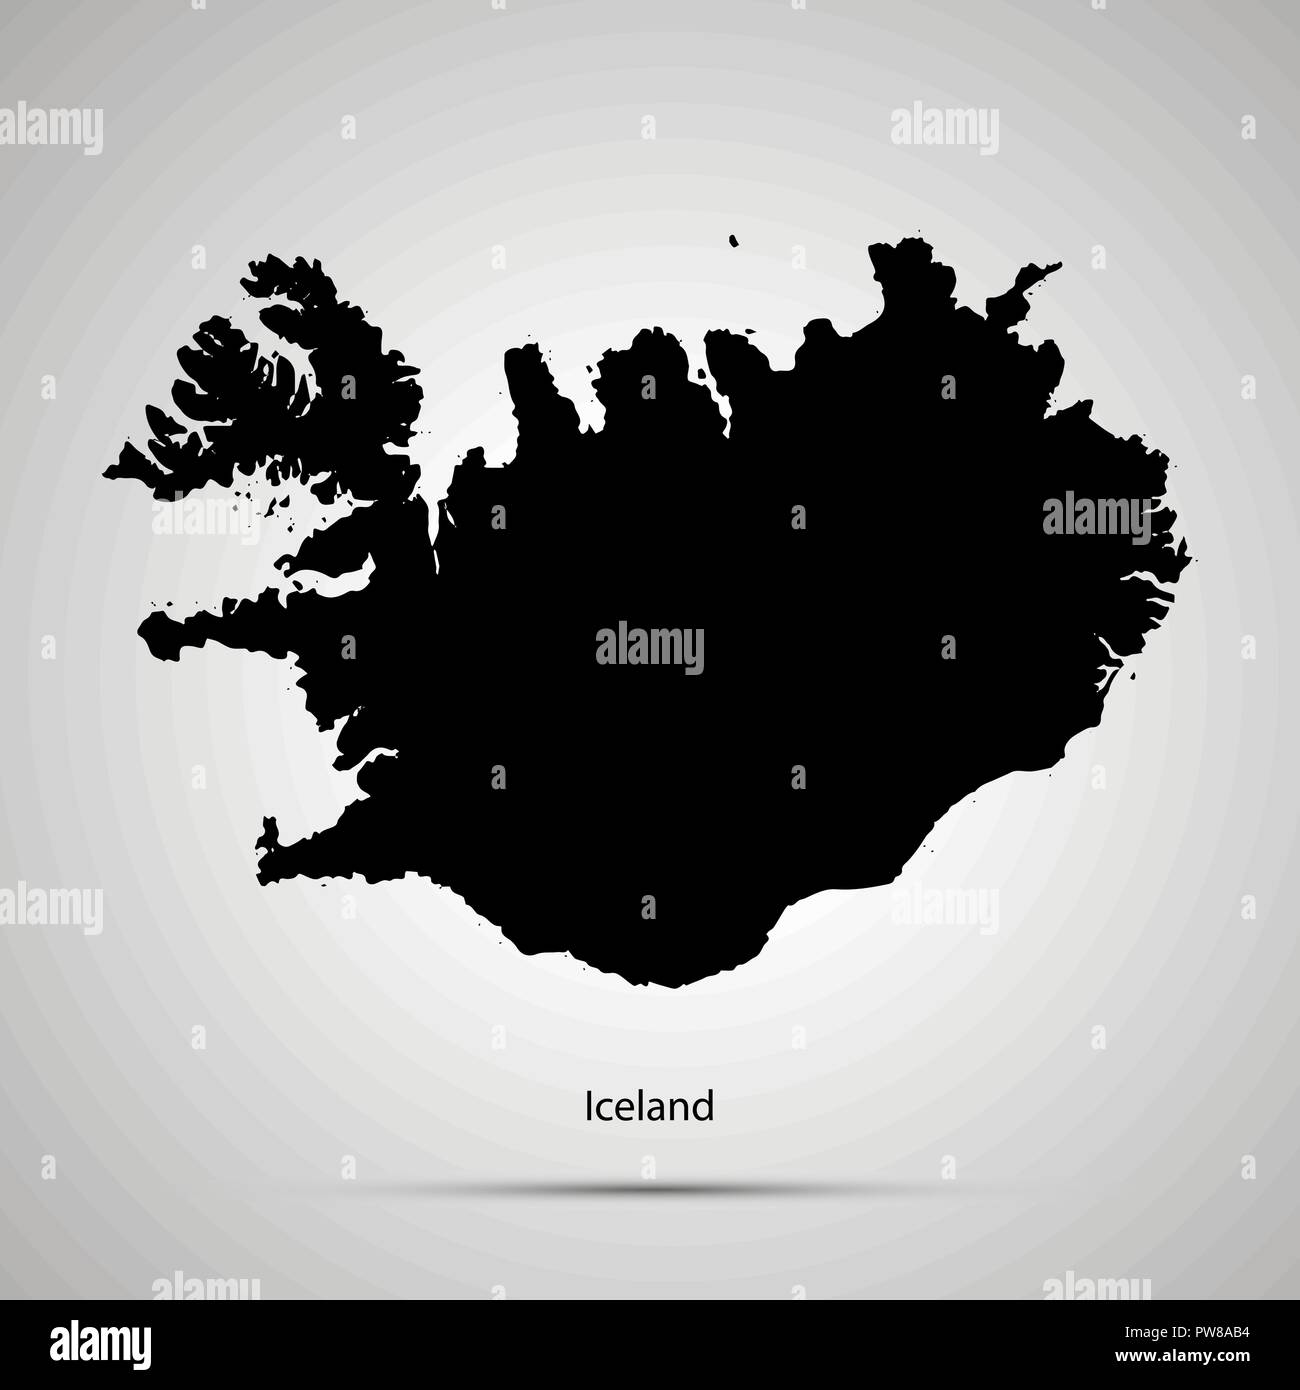 Iceland country map, simple black silhouette on gray Stock Vector